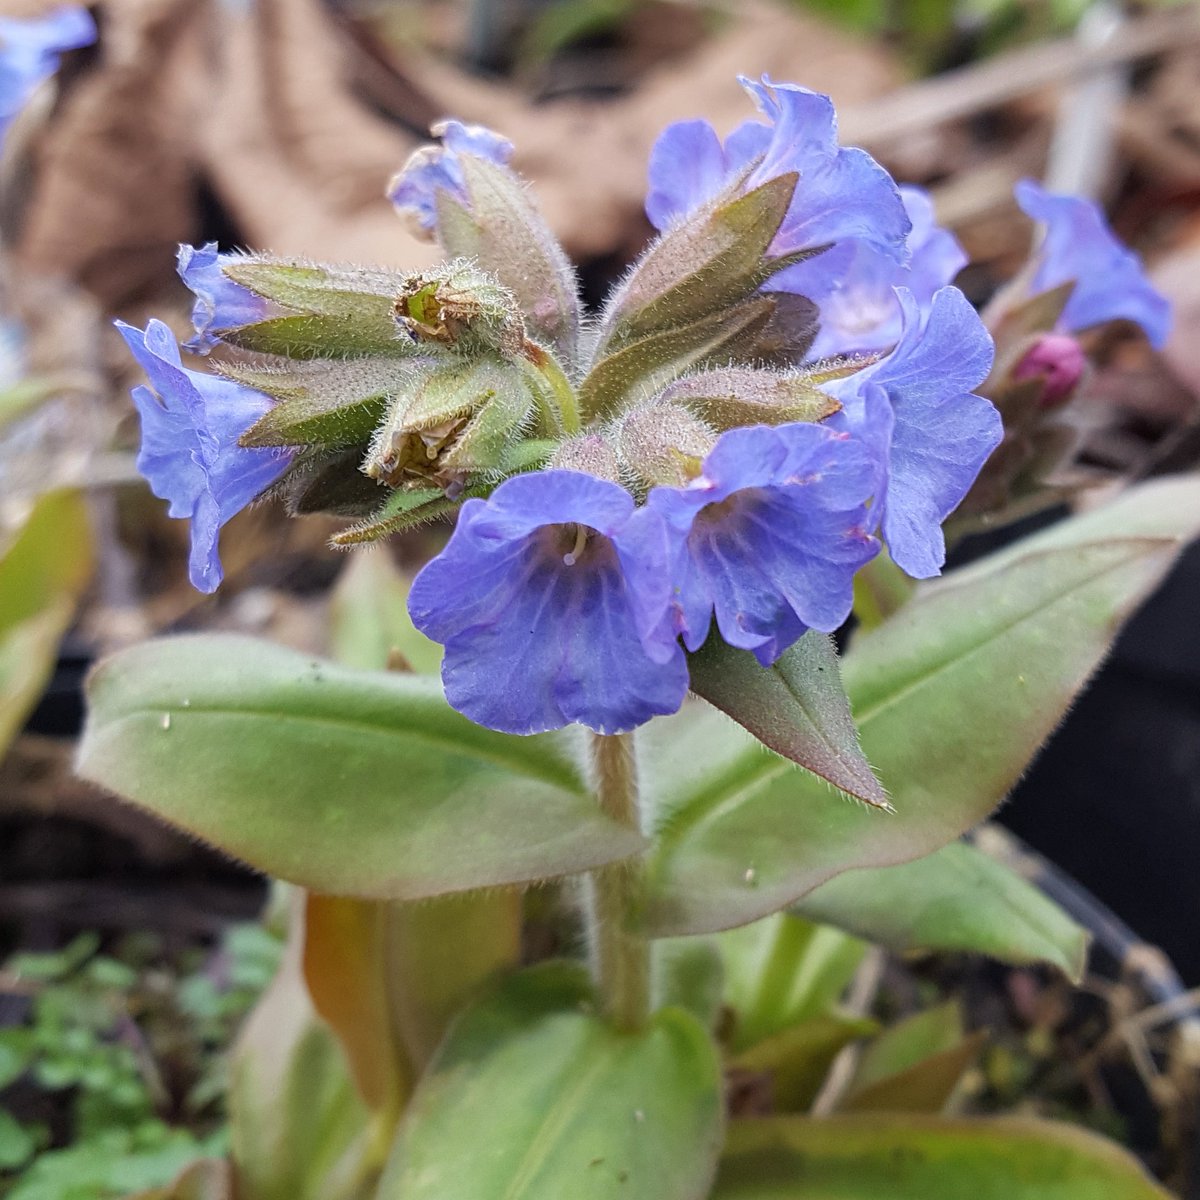 A change from the #snowdrops - Pulmonaria Cally Seedling. 
#pulmonaria #lungwort #shadeplants #woodlandflowers